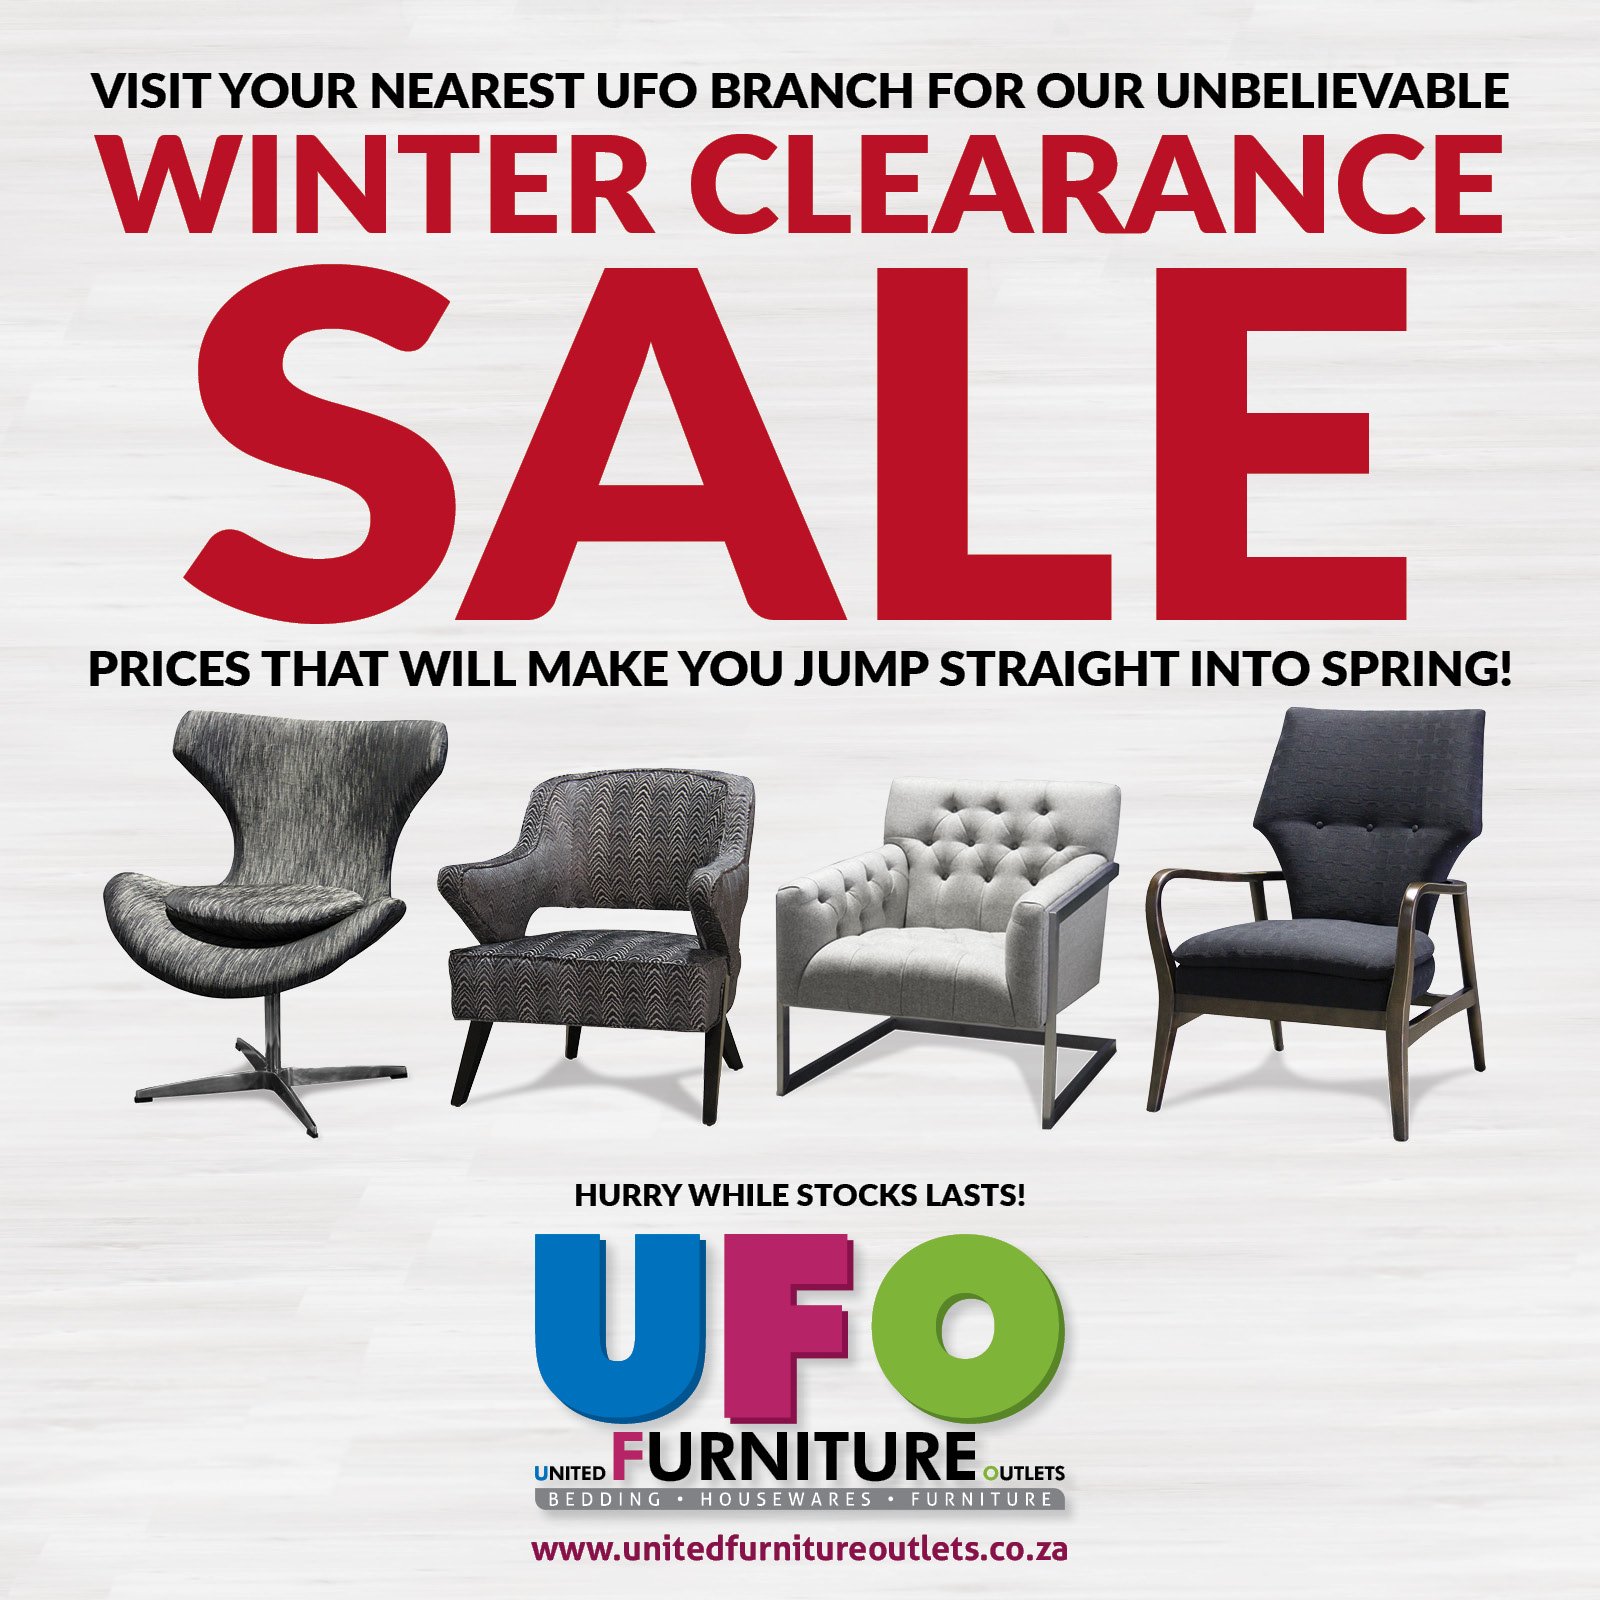 Southgate Mall on X: You have to head over to UFO Furniture's for